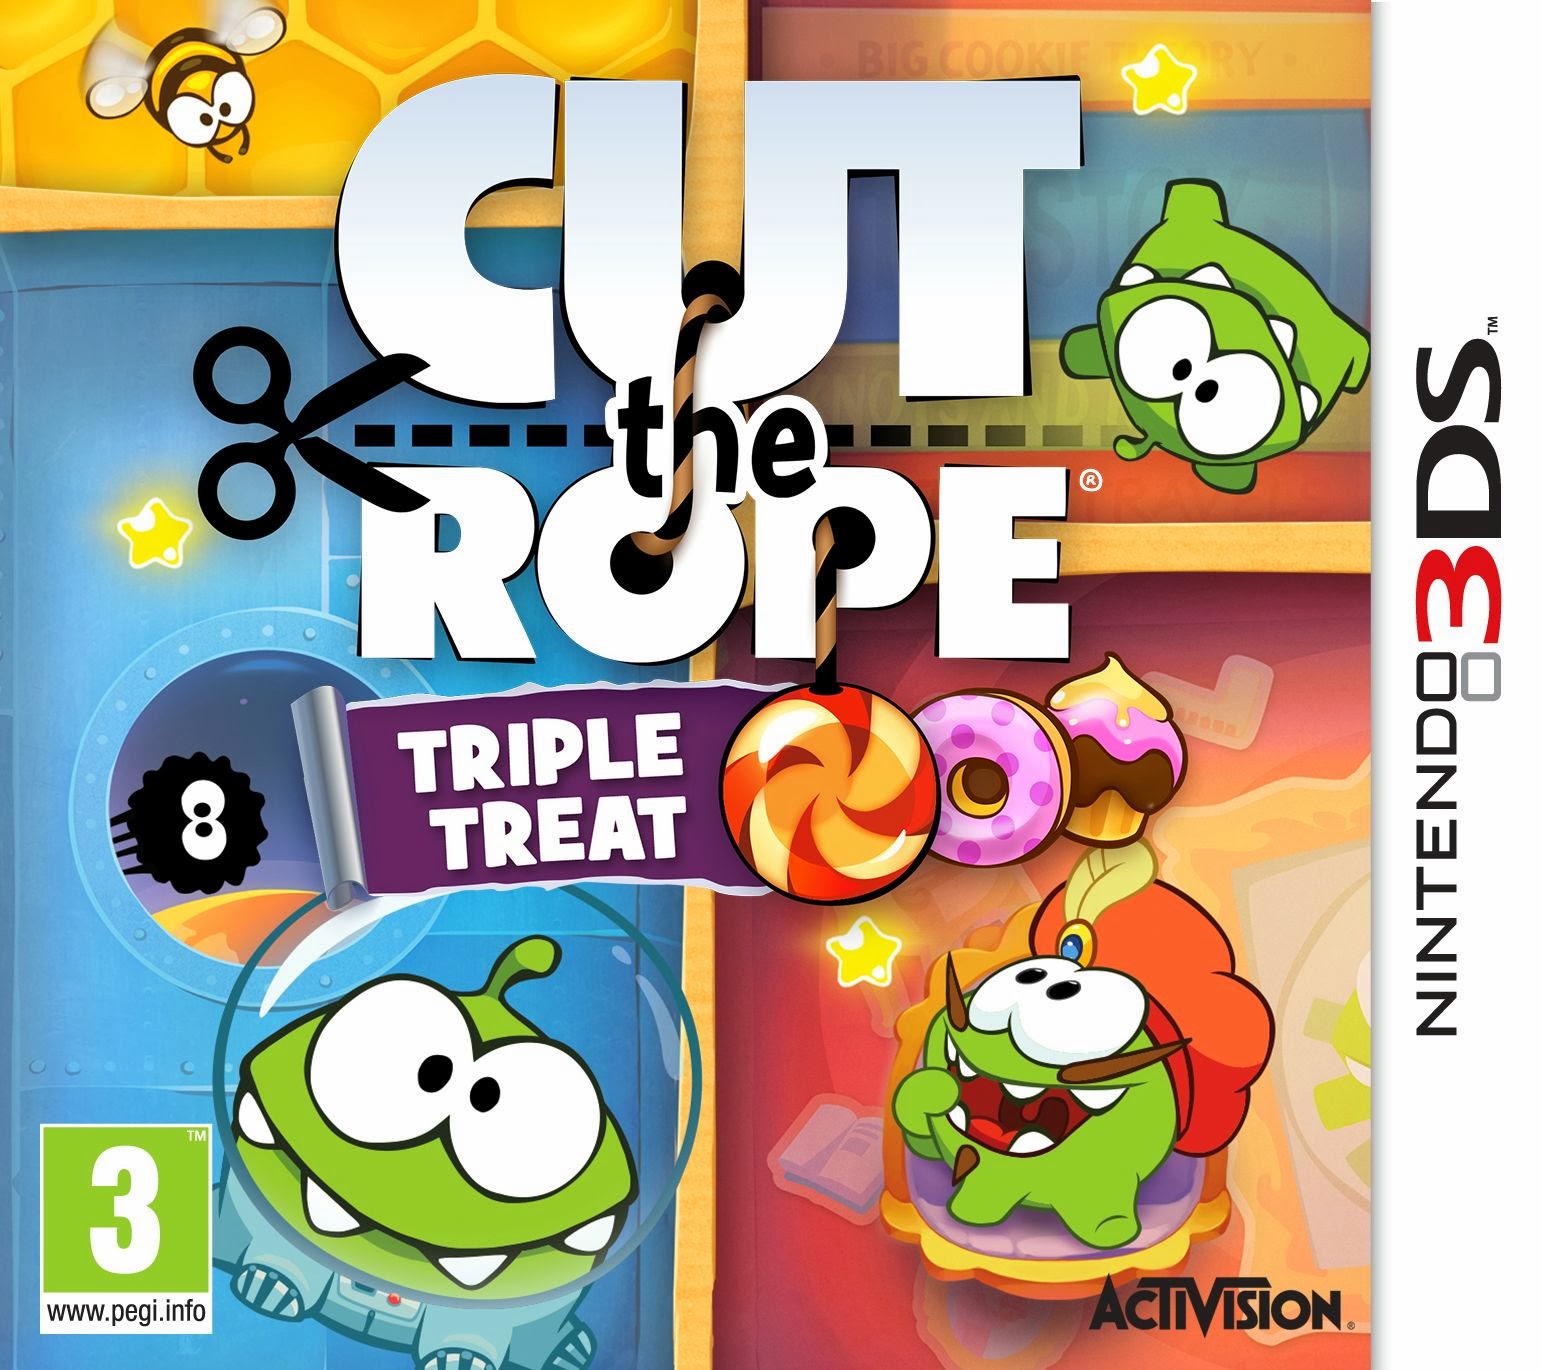 Cut the Rope: Triple Treat | Cut the Rope Wiki | FANDOM powered by Wikia